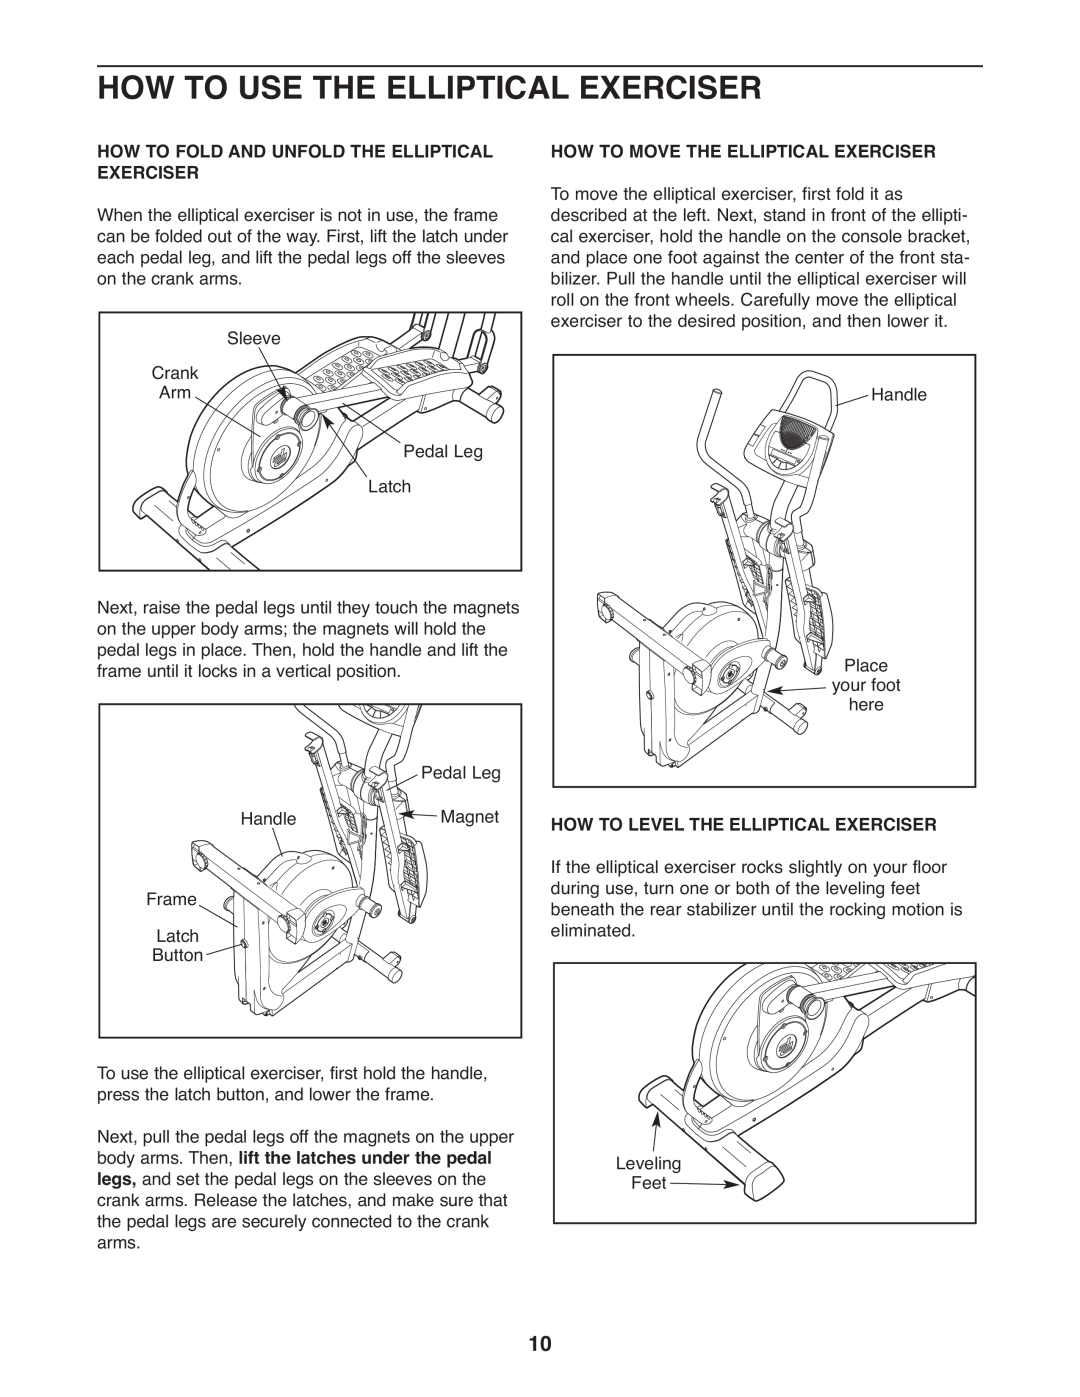 ProForm PFEL5905.0 user manual How To Use The Elliptical Exerciser, How To Fold And Unfold The Elliptical Exerciser 